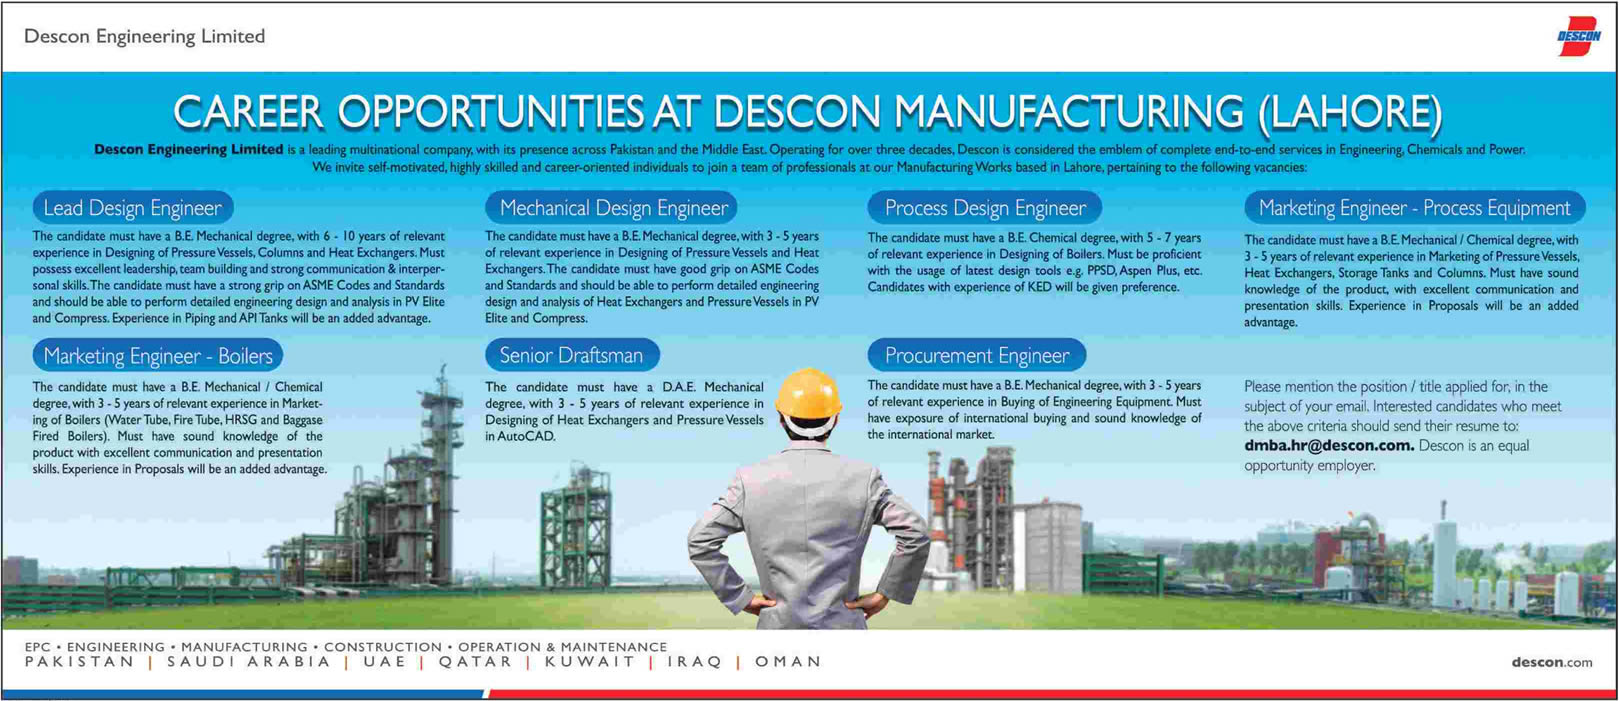 Descon Engineering Limited Lahore Pakistan Jobs 2014 August at Descon Manufacturing